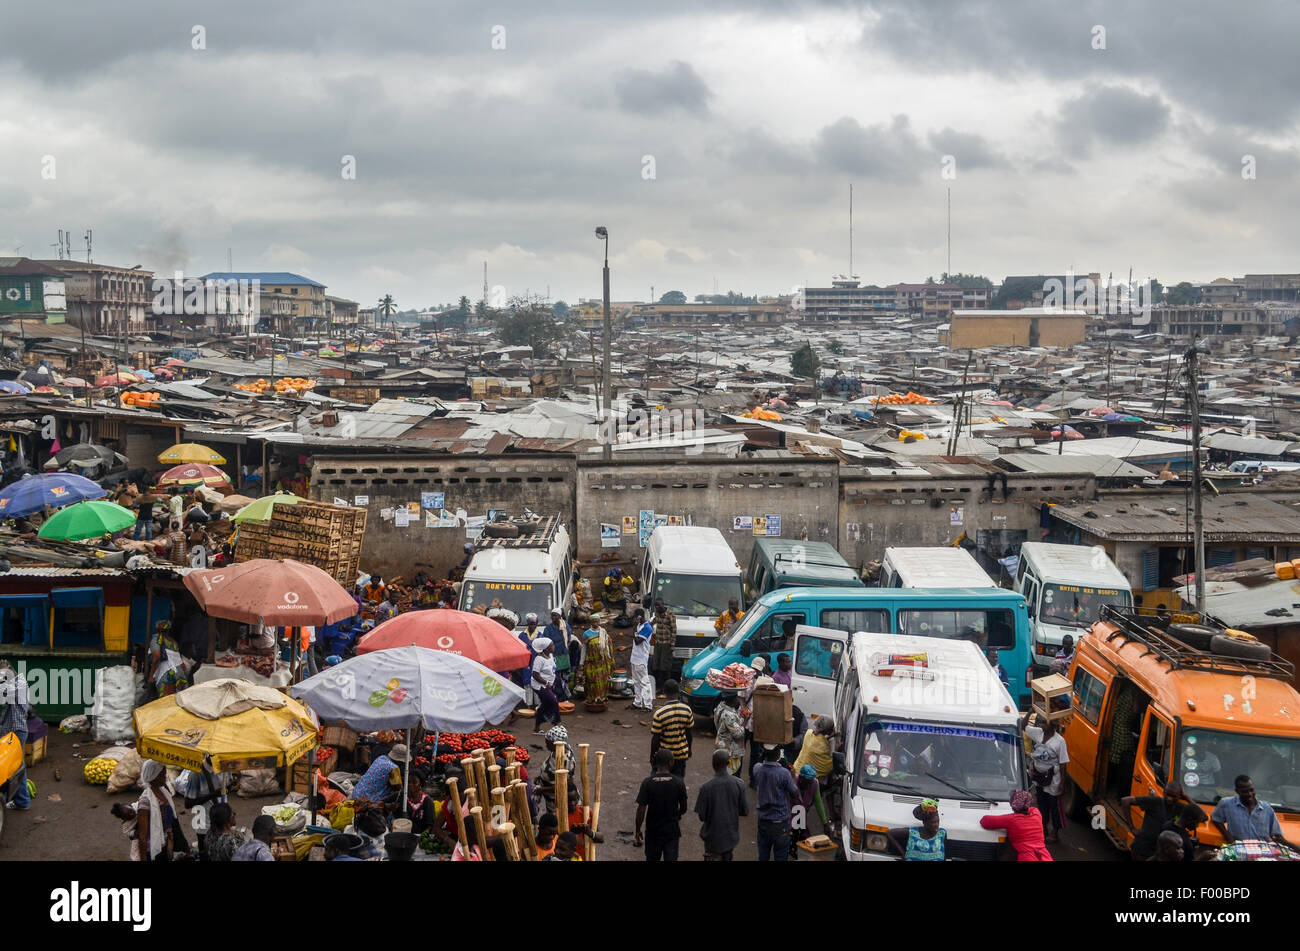 Kejetia market (Kumasi central market) in Ghana, the largest single market in West Africa with over 10,000 stores and stalls Stock Photo